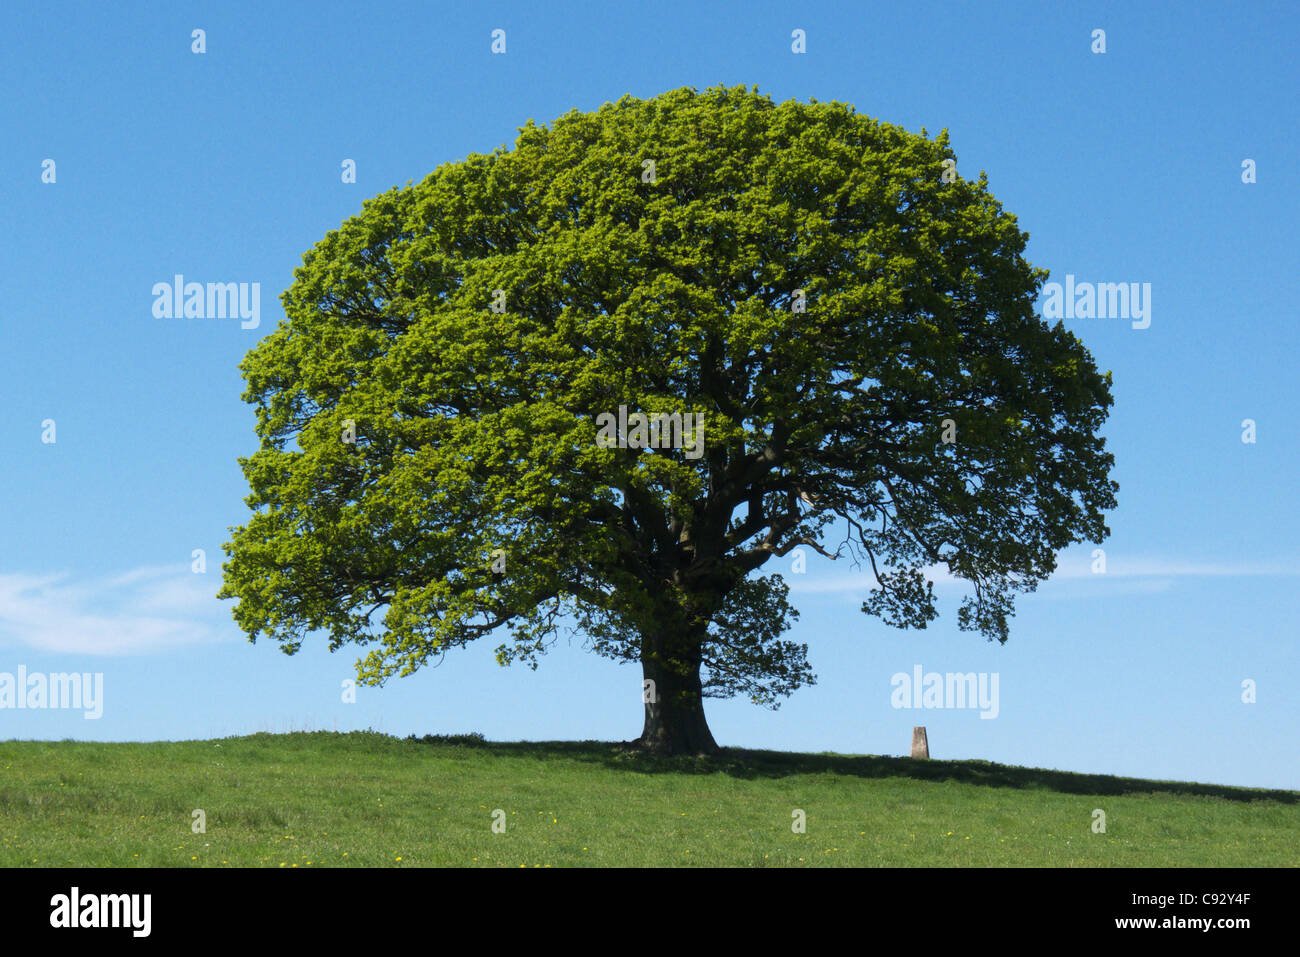 A single tree in summer Stock Photo